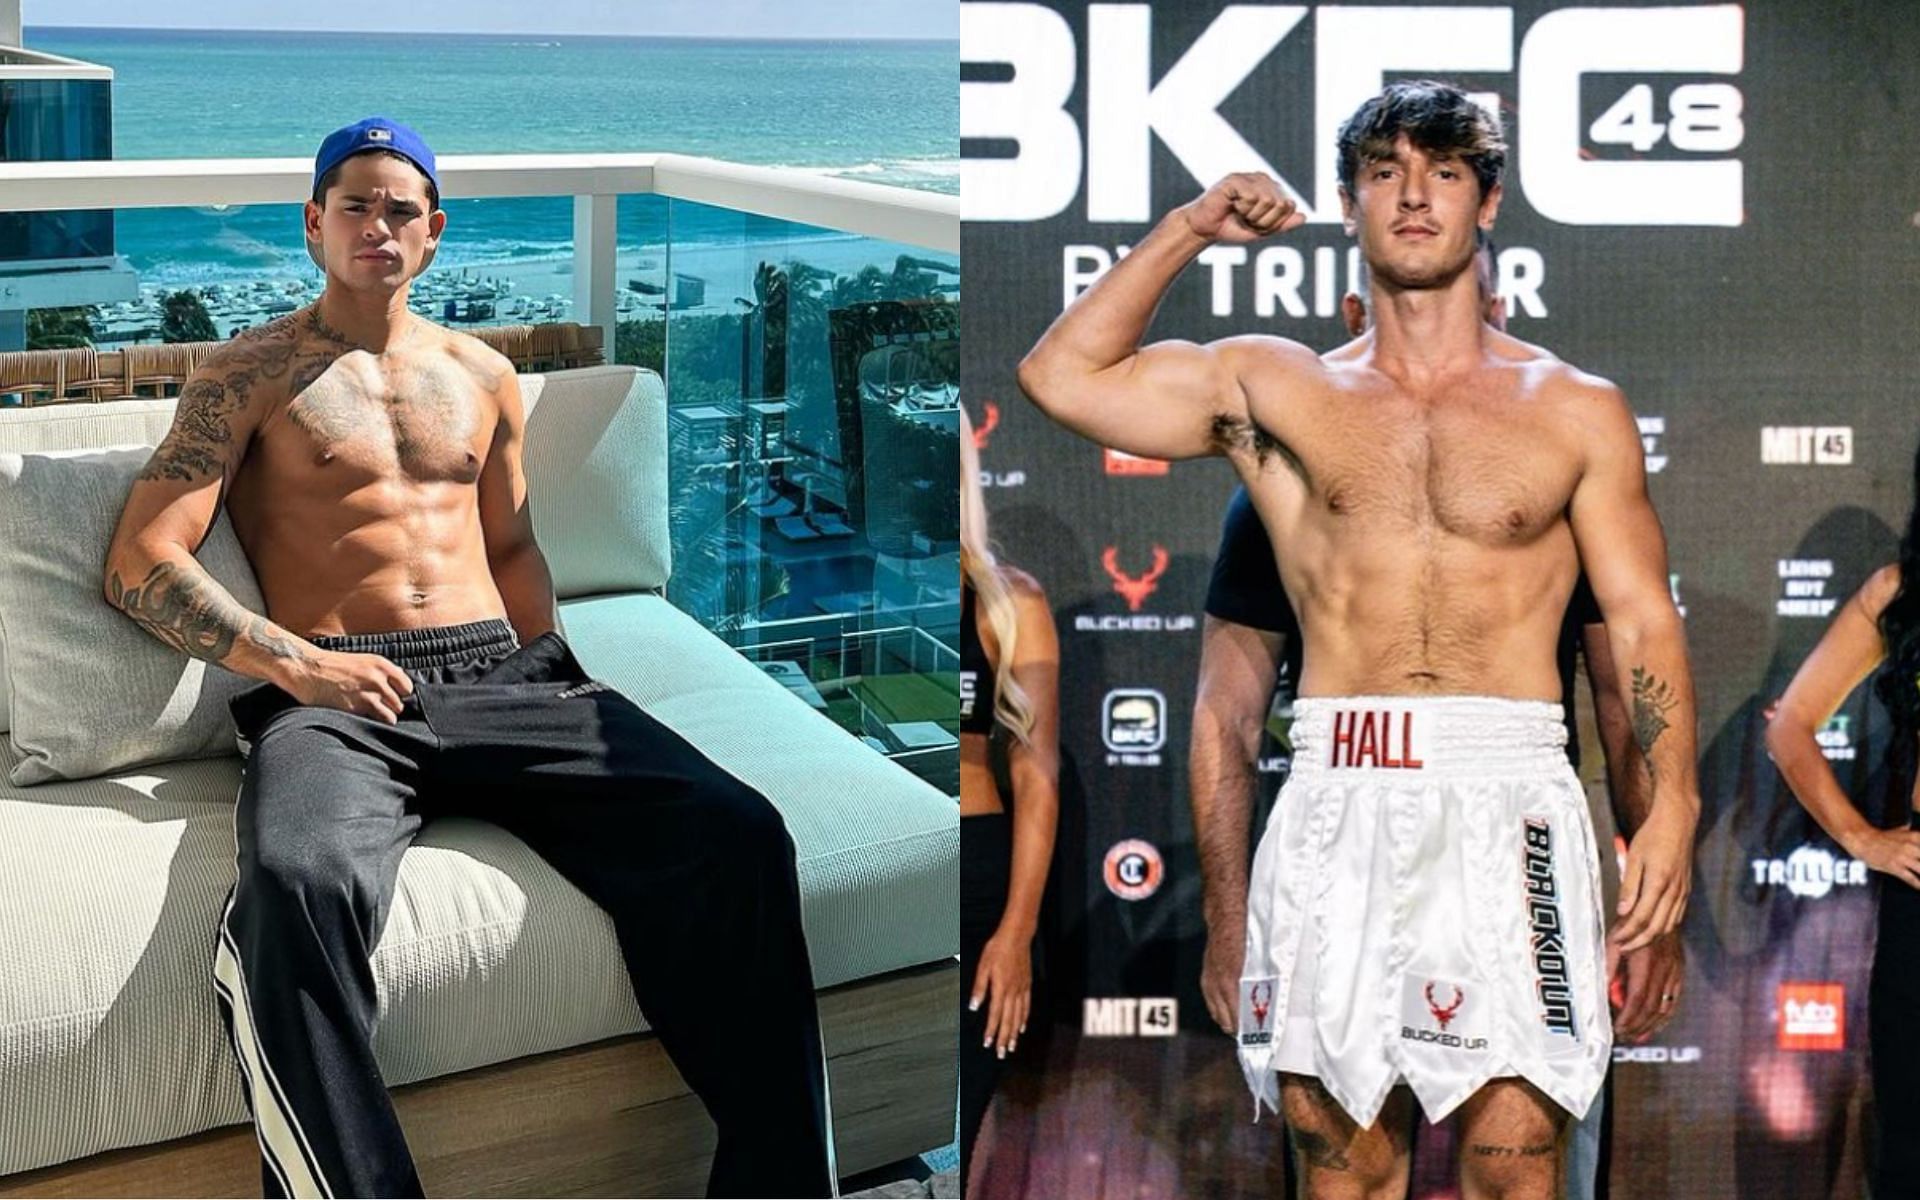 Ryan Garcia (left) calls out Bryce Hall (right) for alleged non-payment [Photo Courtesy @kingryan and @brycehall on Instagram]